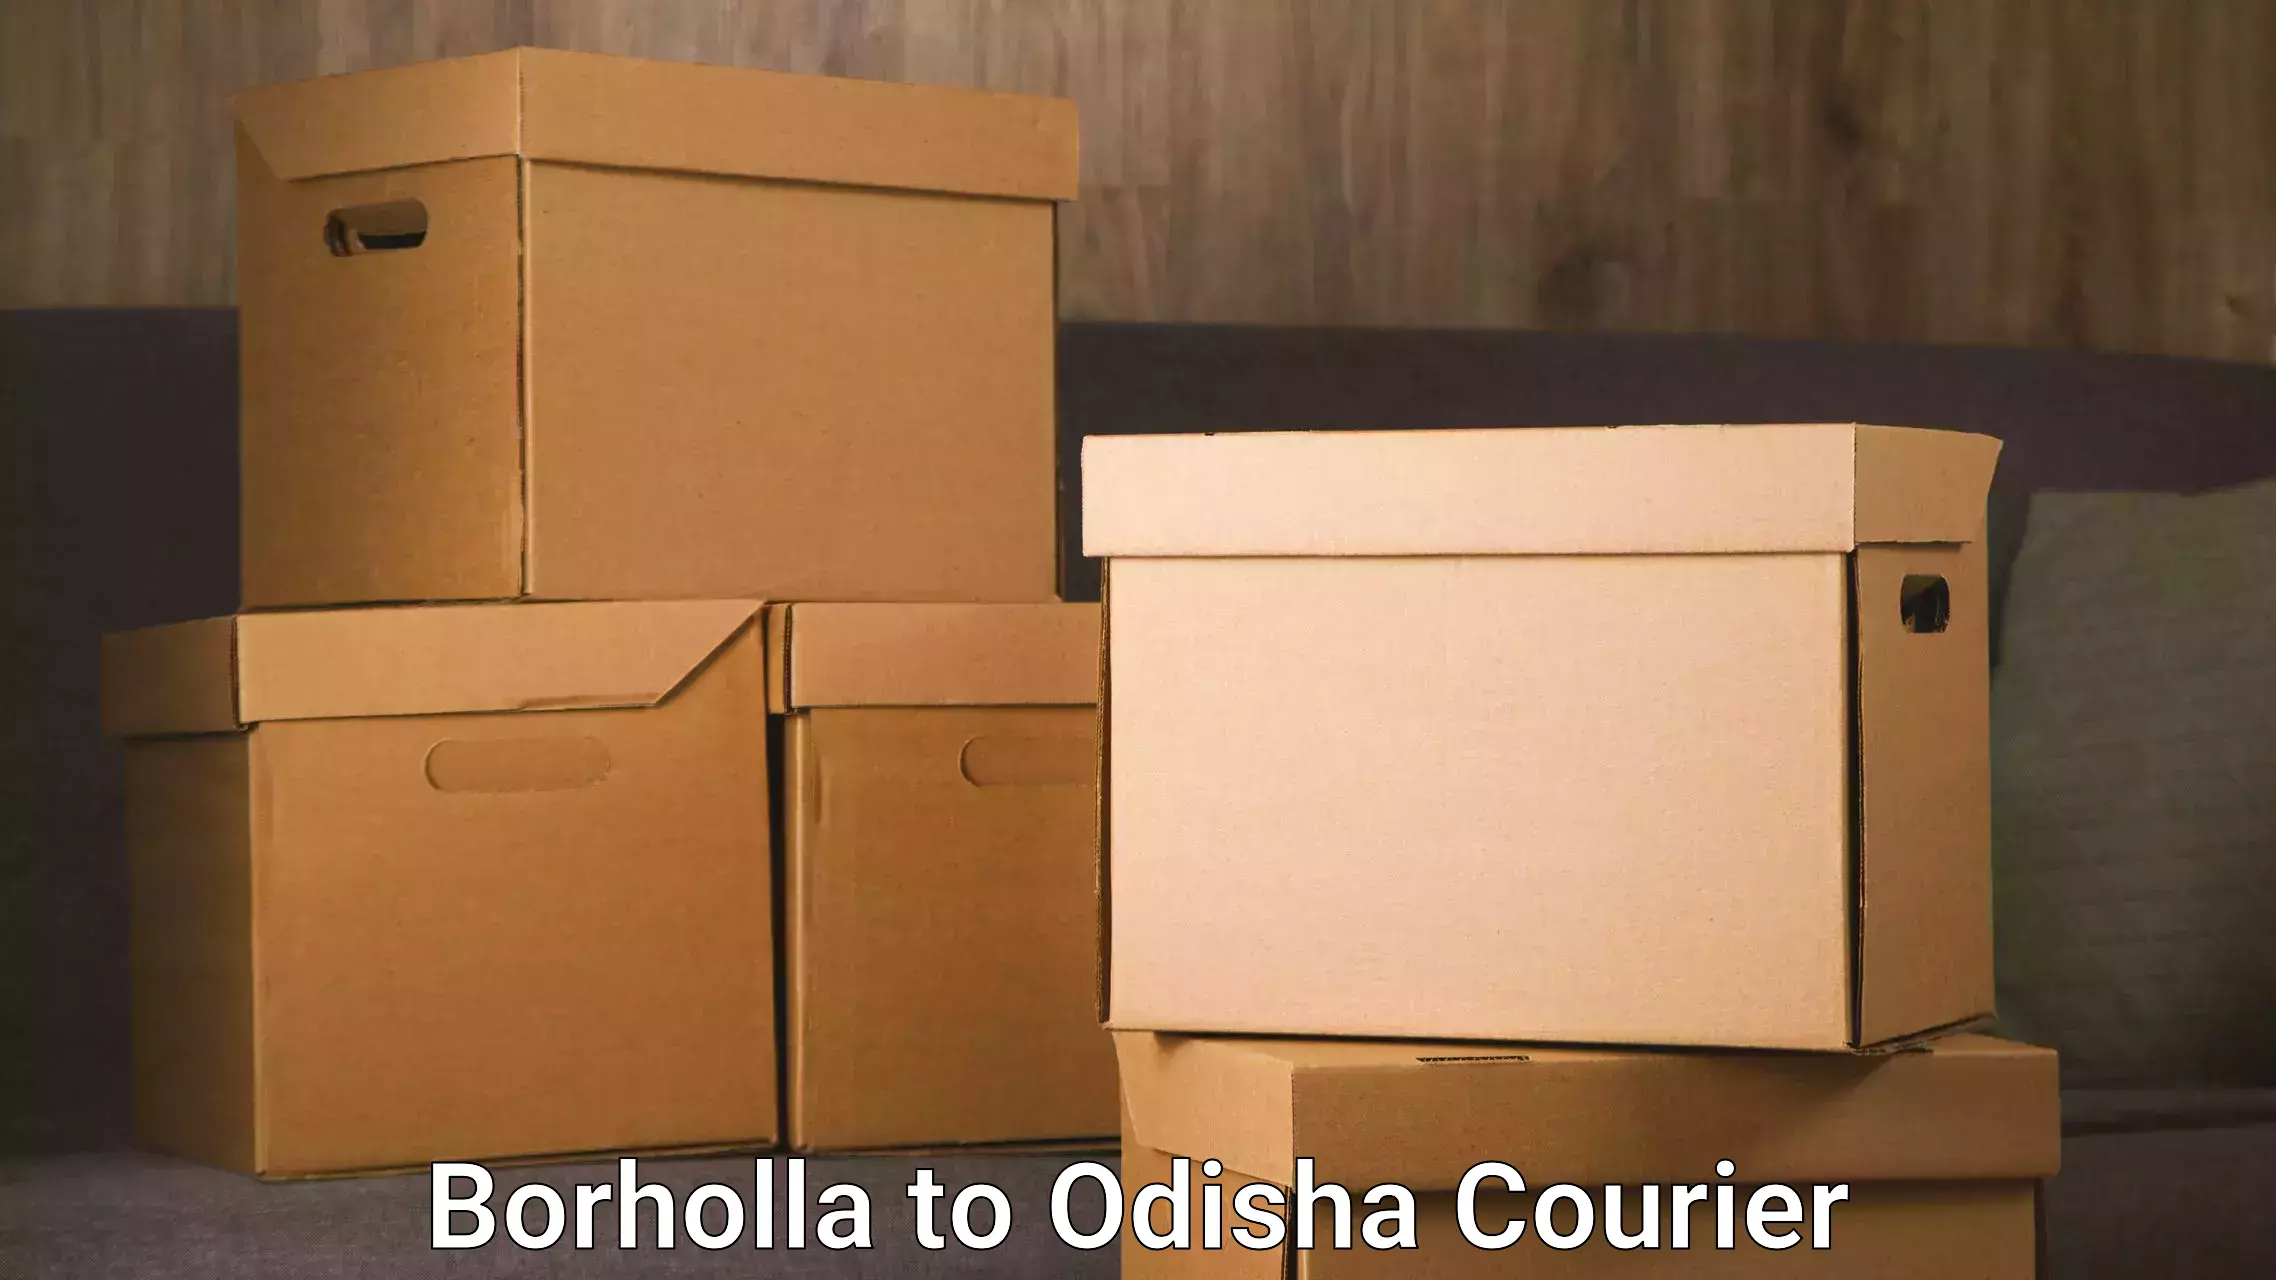 State-of-the-art courier technology Borholla to Sohela